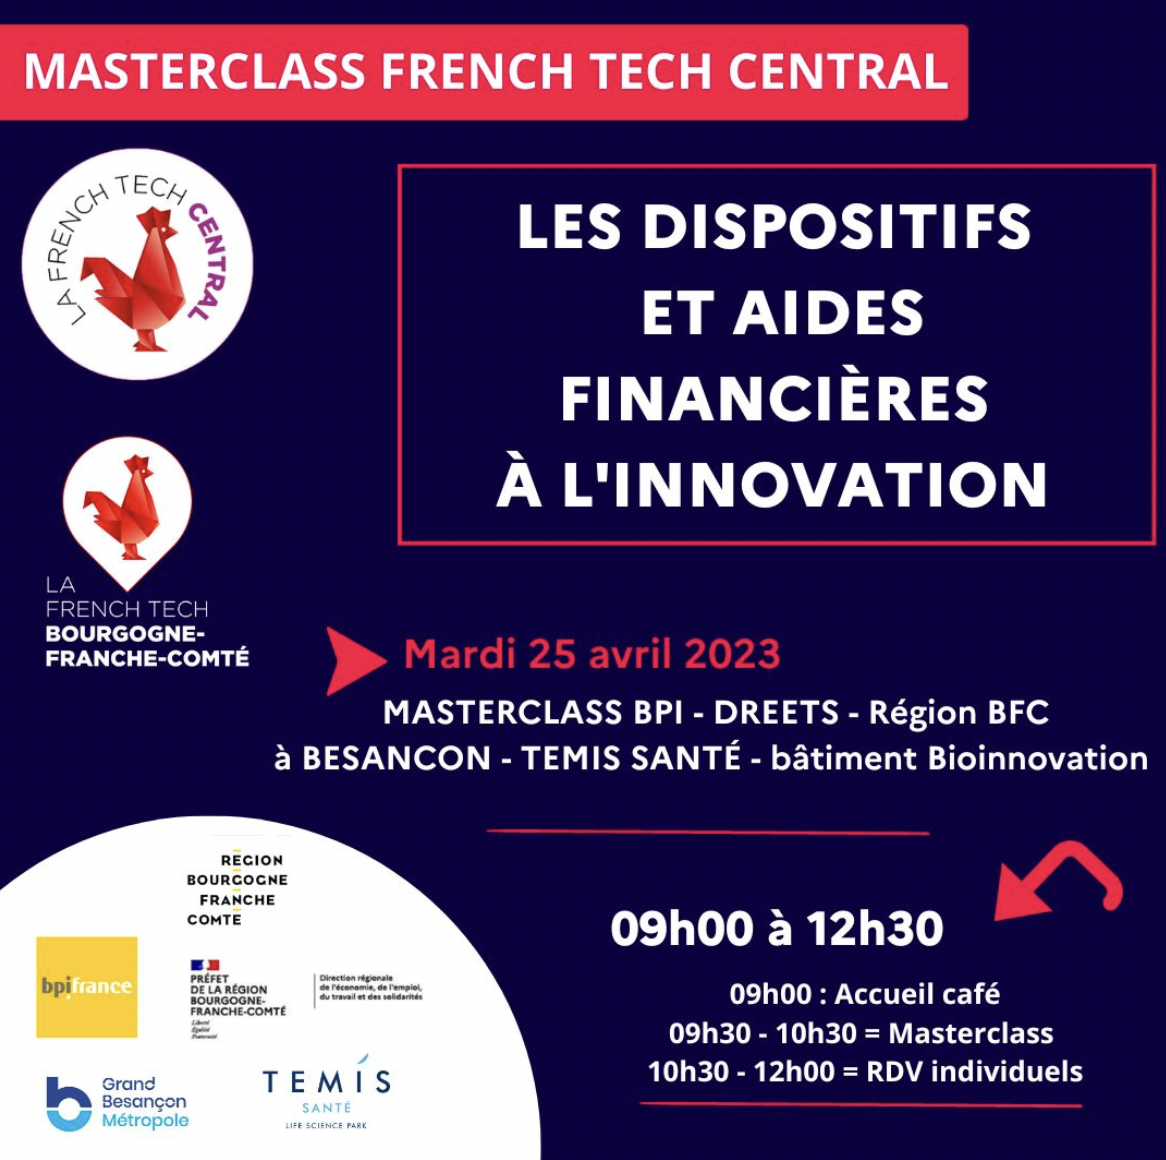 MASTERCLASS FRENCH TECH CENTRALE